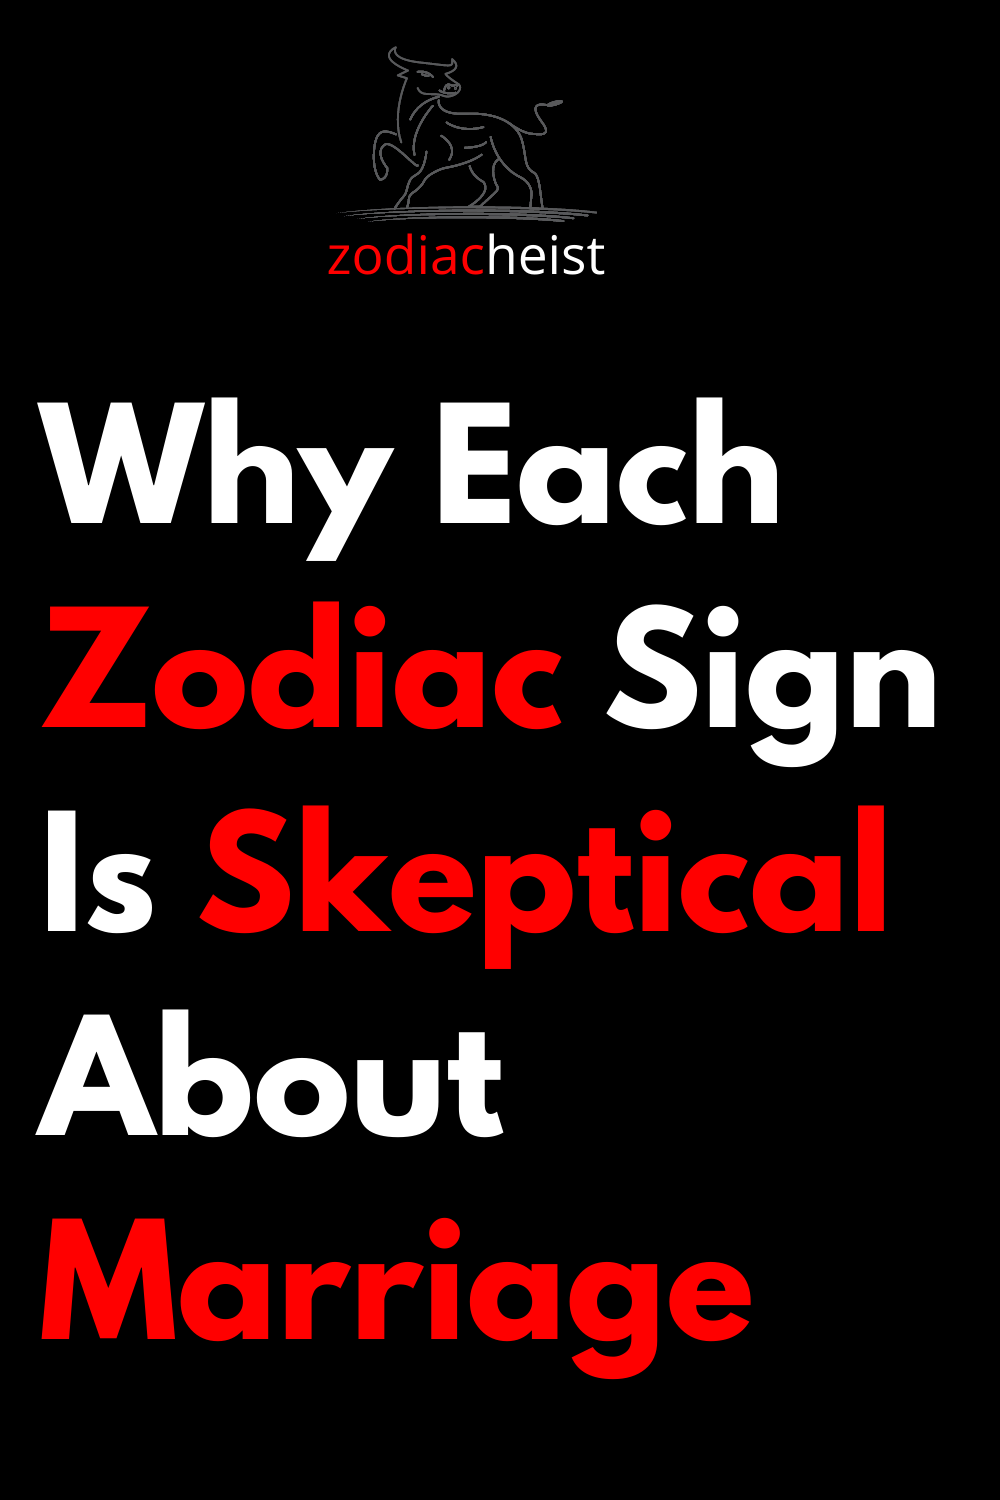 Why Each Zodiac Sign Is Skeptical About Marriage